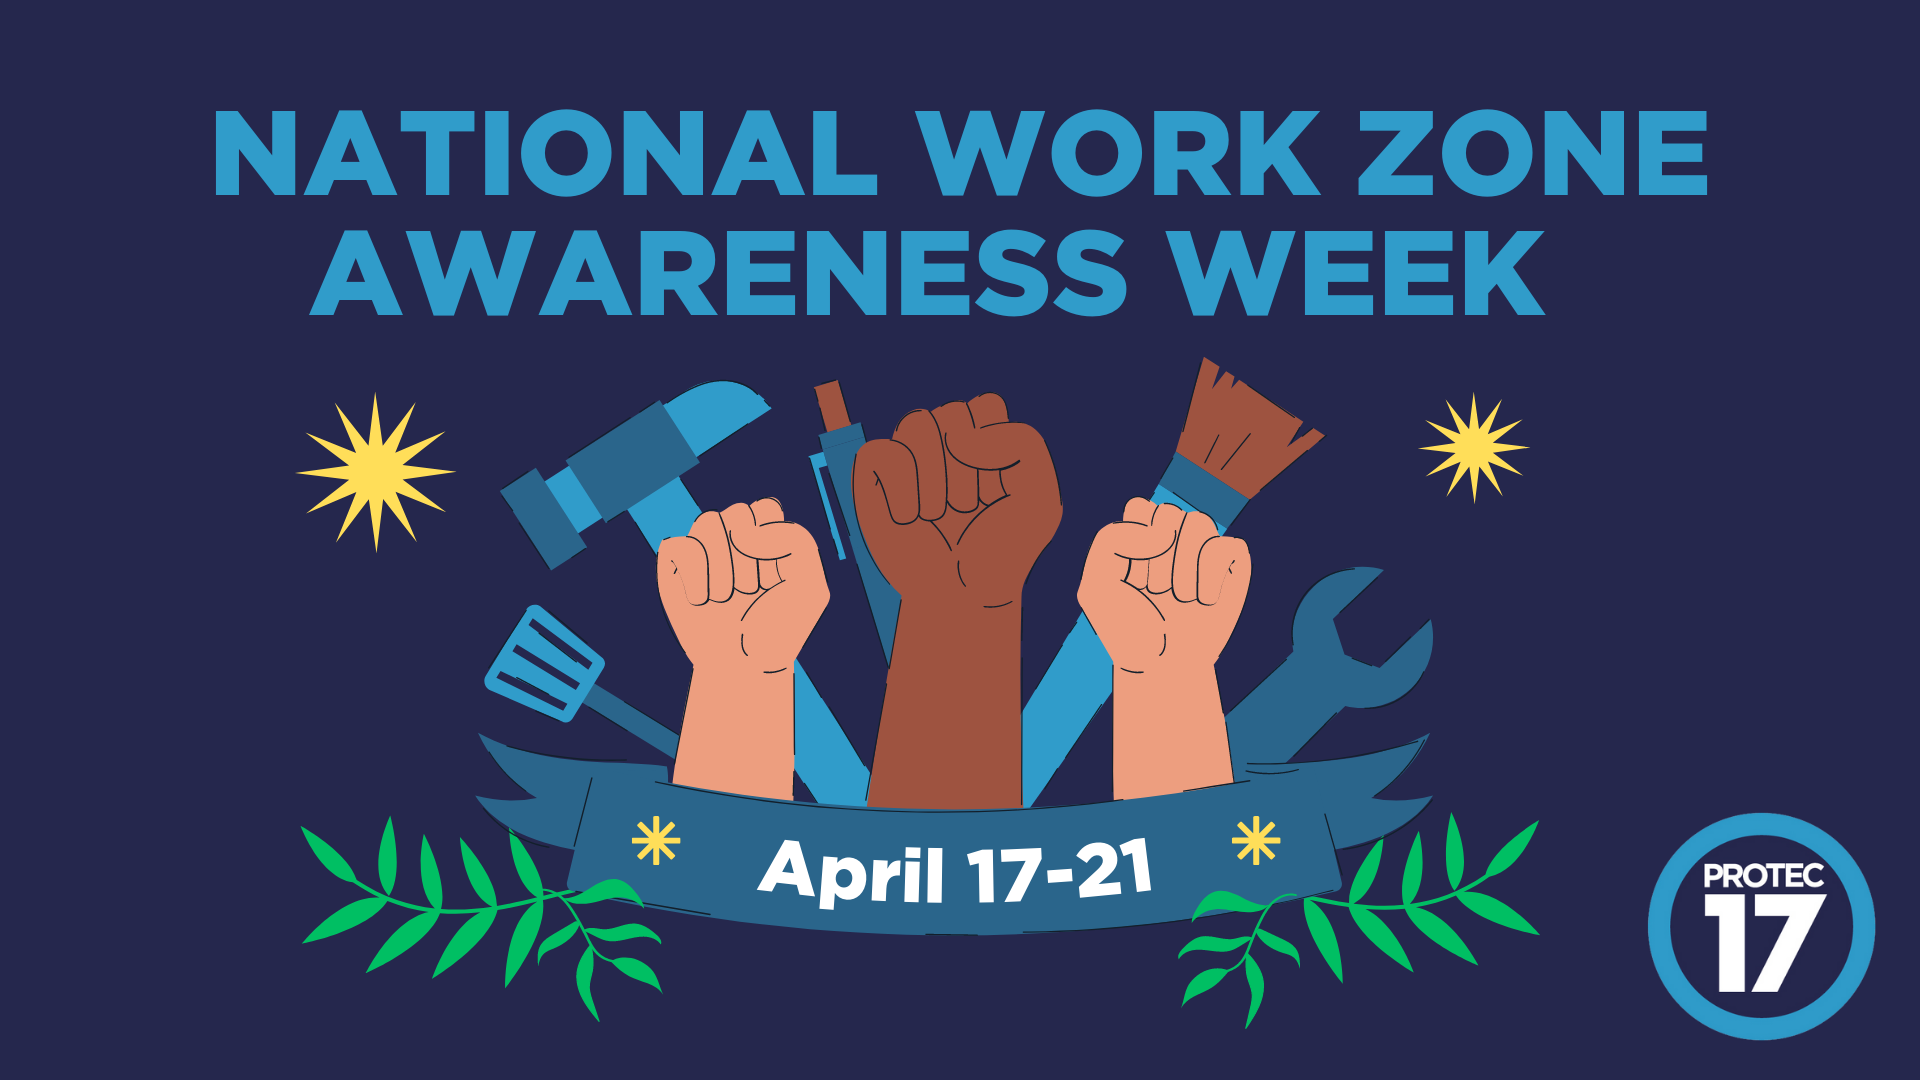 Image that reads, "NATIONAL WORK ZONE AWARENESS WEEK | April 17-21" There is an illustration of solidarity fists raised in the air and varying work tools listed in the background. There are some illustrated leaves and suns around the image. The PROTEC17 logo is in the bottom right.